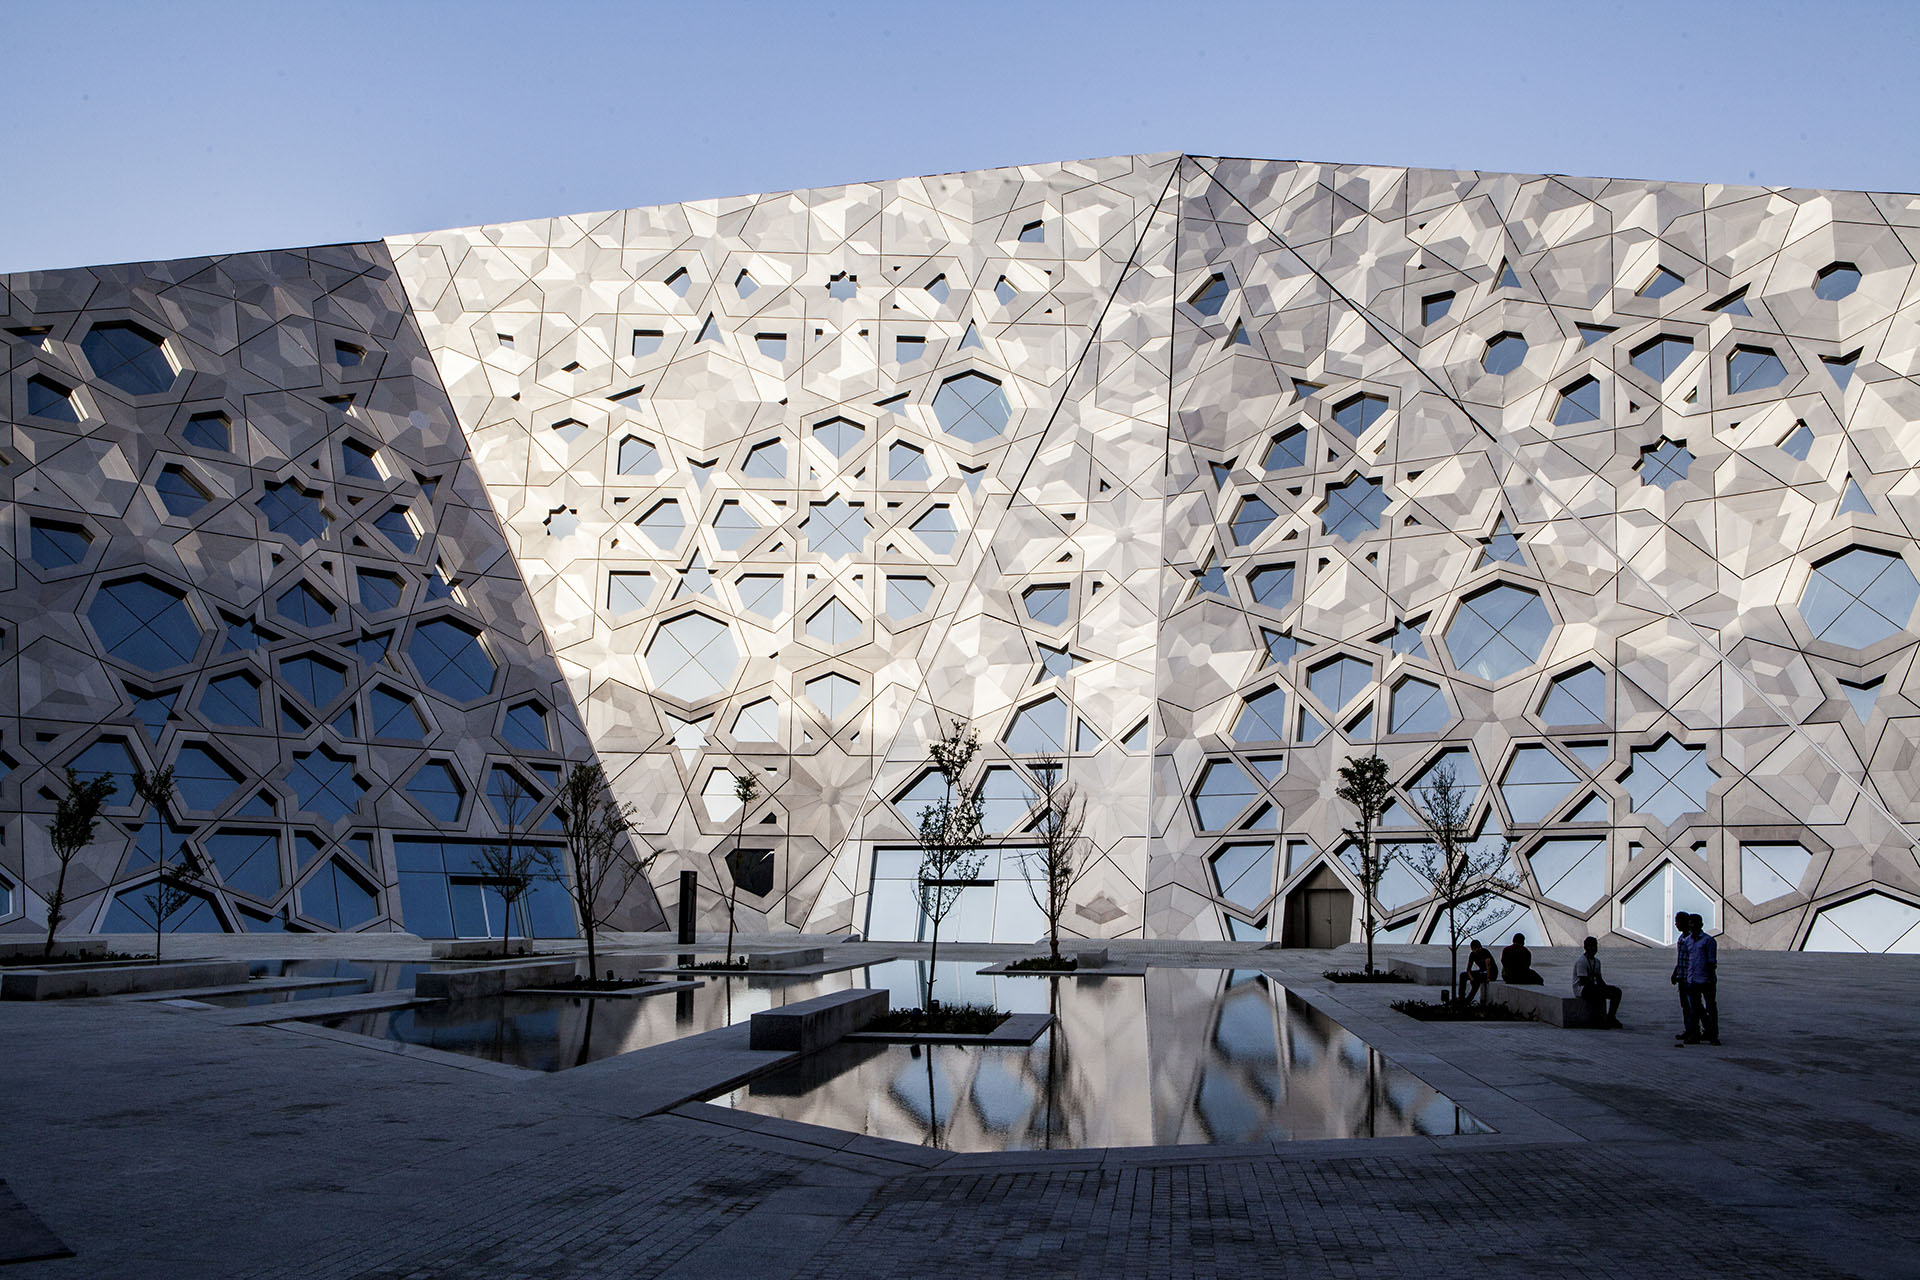 <p>The combination of the cultural centre’s architectural form, decorative patterning and modern material enables the building to sparkle like jewels set within an expansive public park.</p>